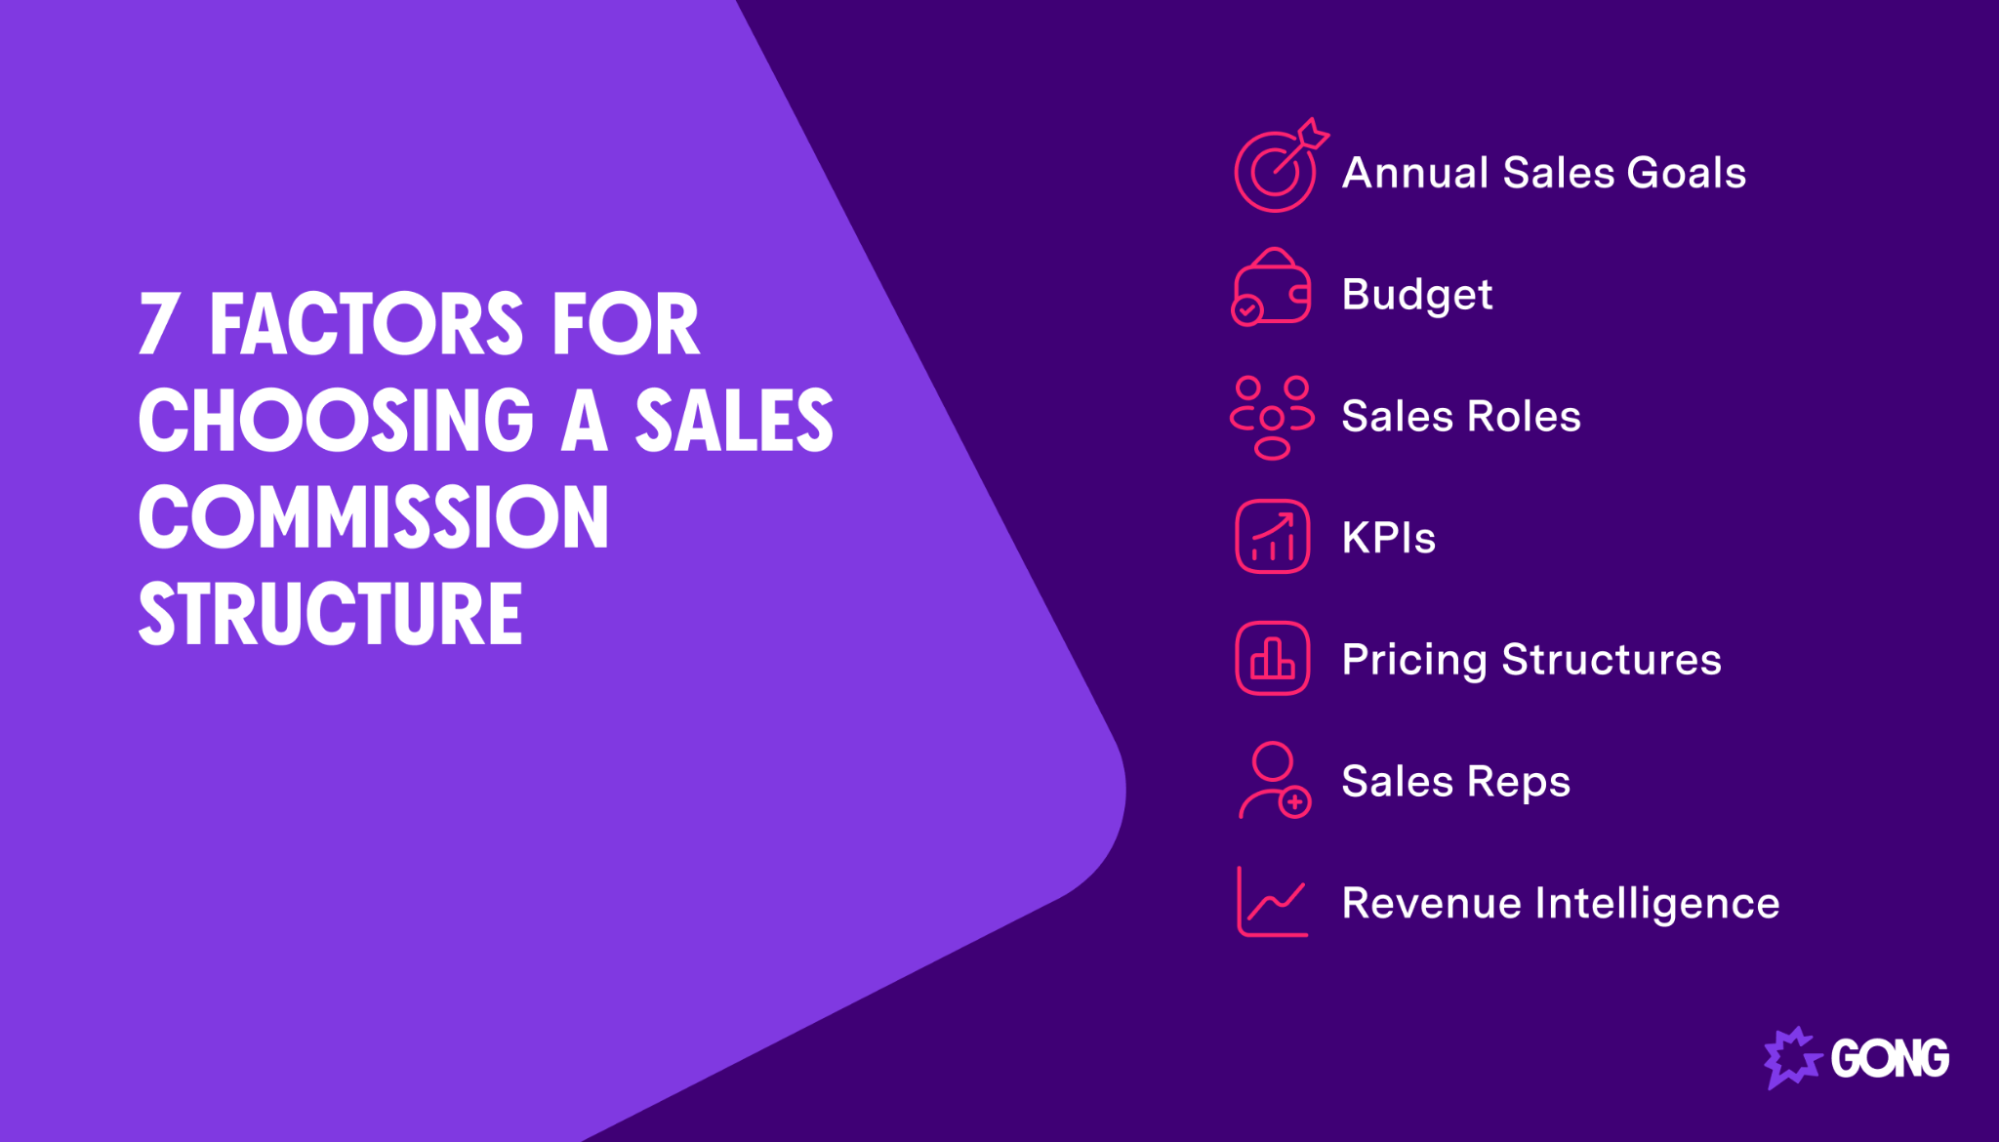 List of 7 factors to consider when choosing a sales commission structure